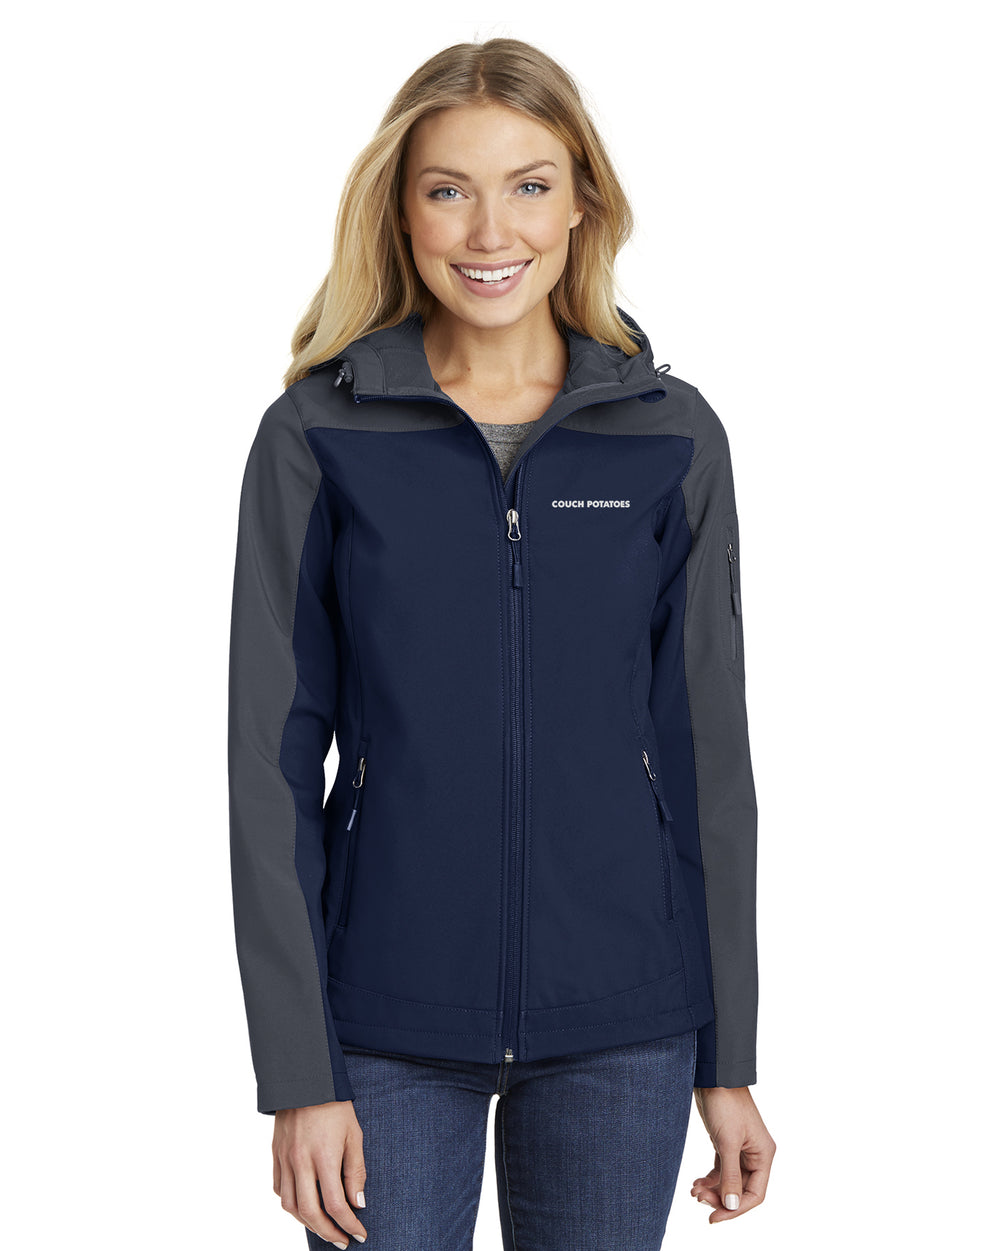 Couch Potatoes - Port Authority Ladies Hooded Core Soft Shell Jacket - L335